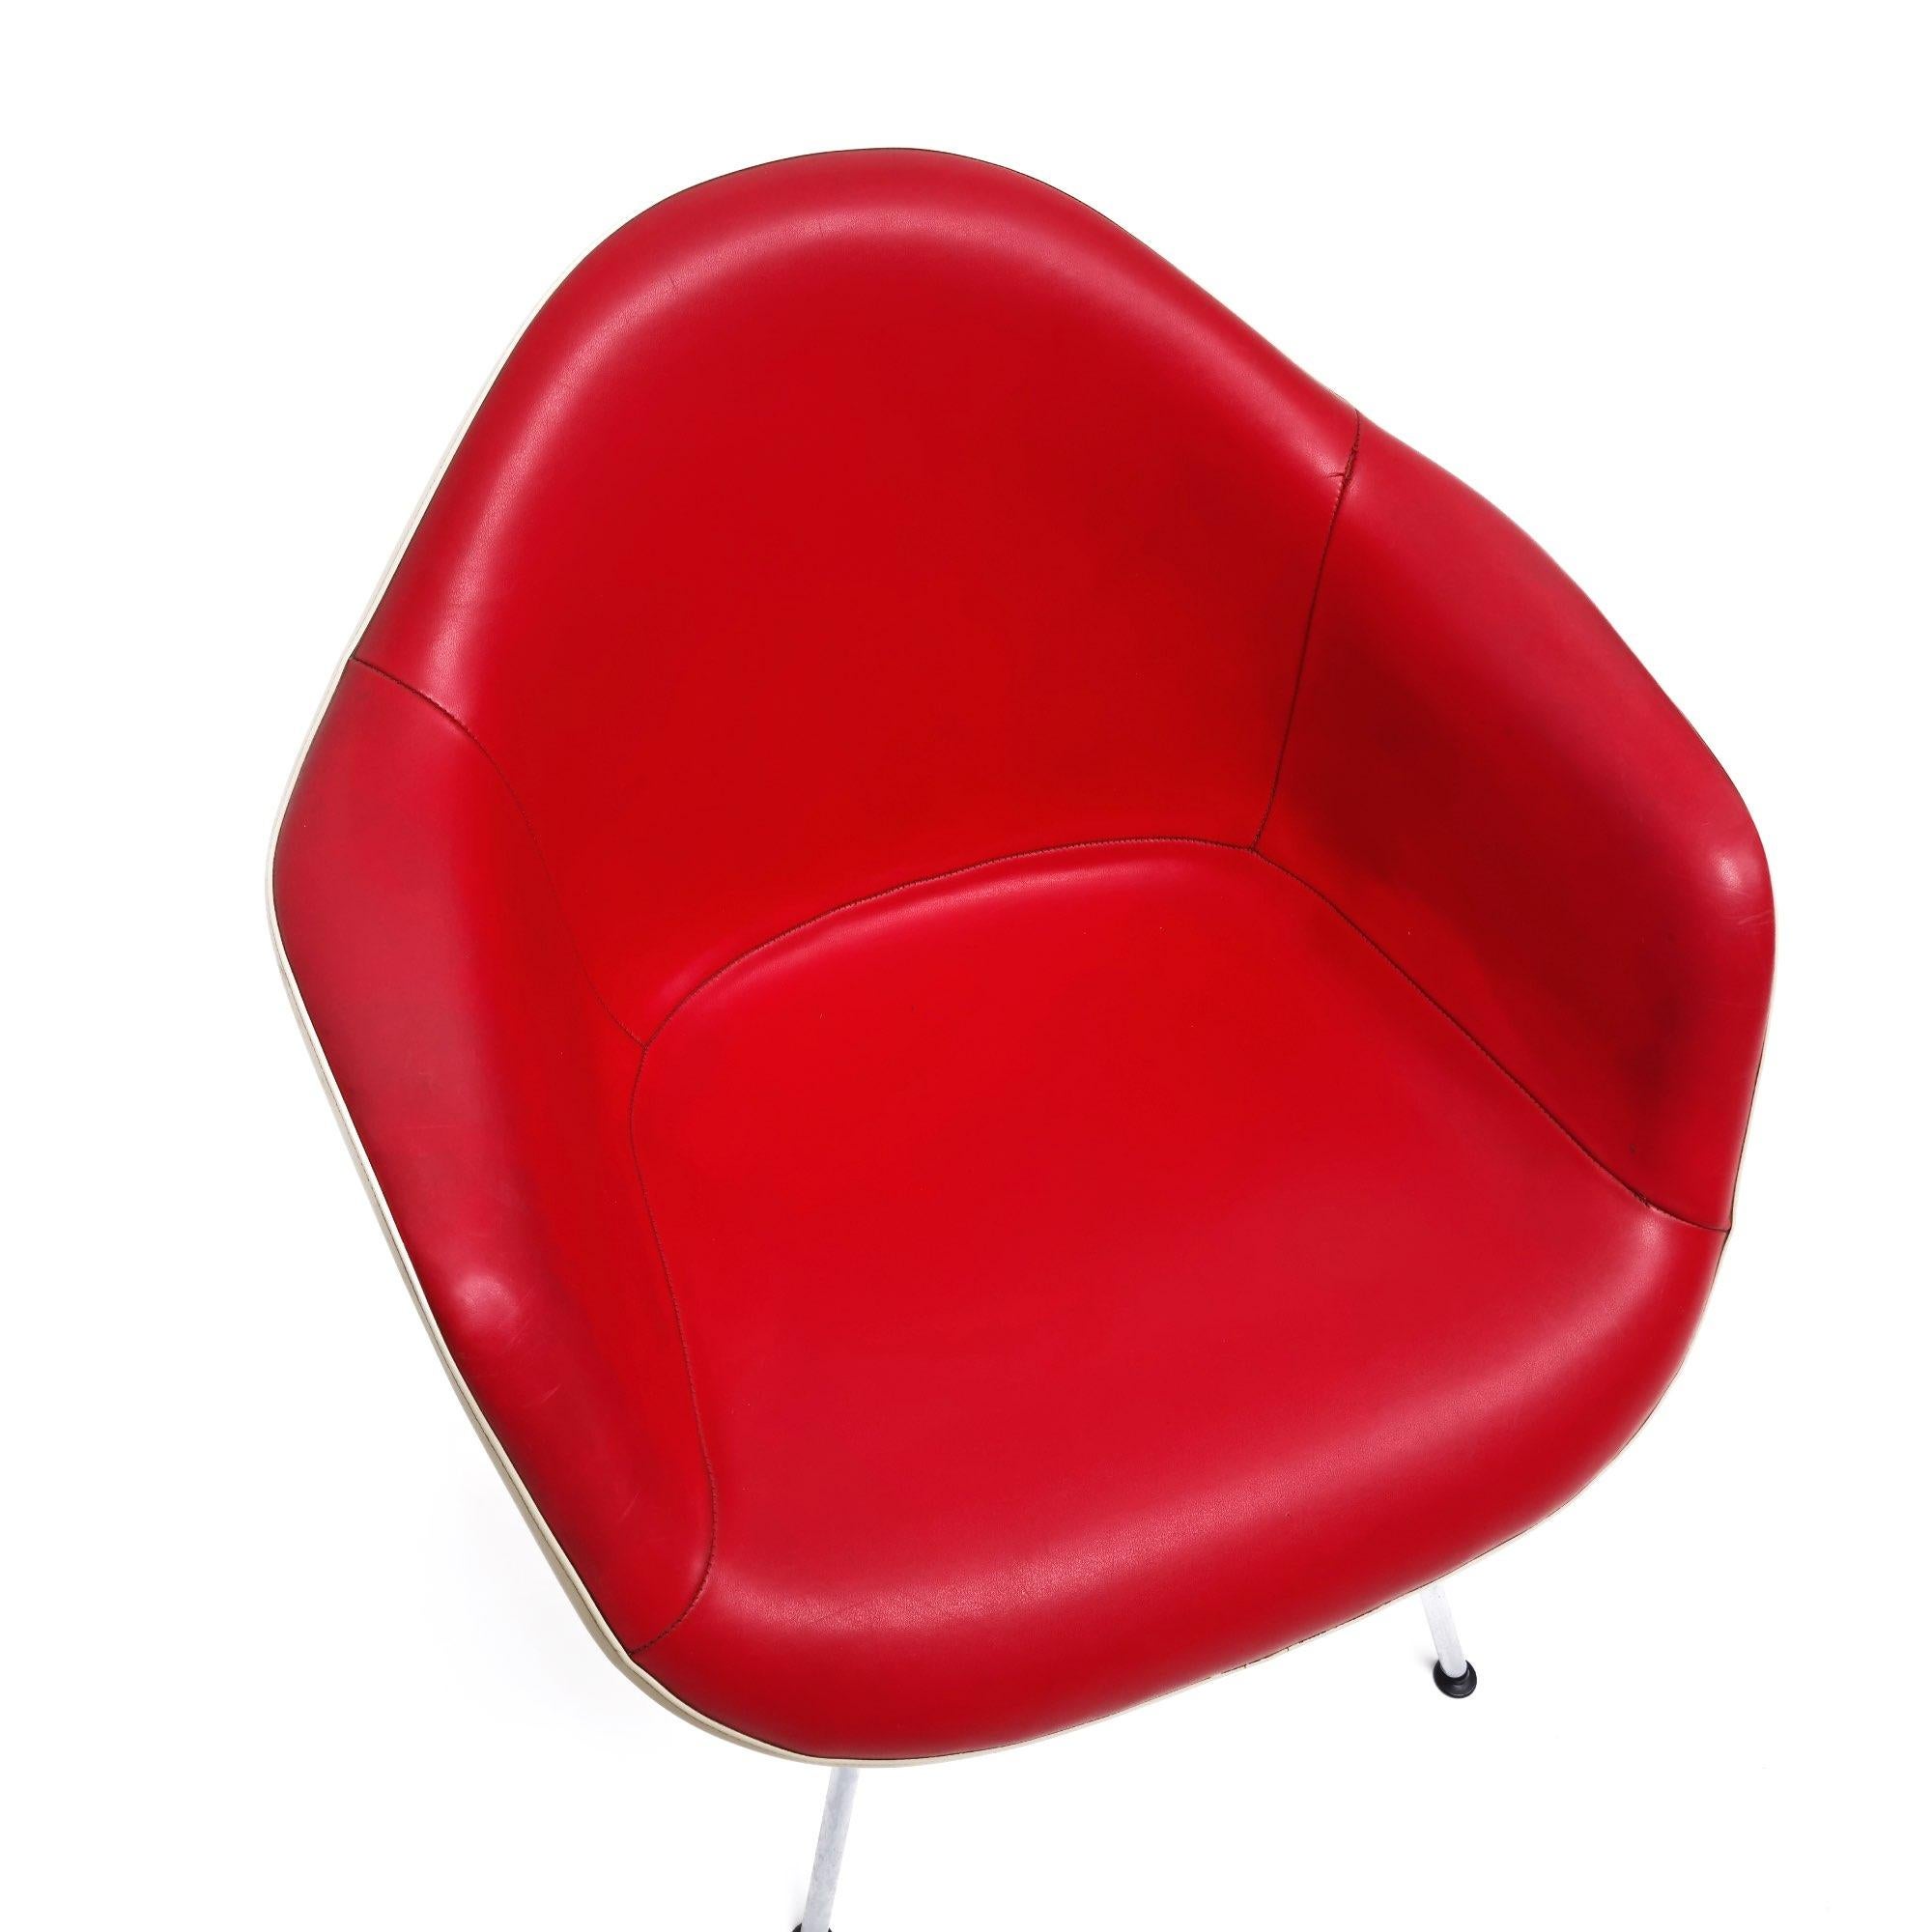 Red Leather 'Dax' Armchair by Charles & Ray Eames, 1960s For Sale 1